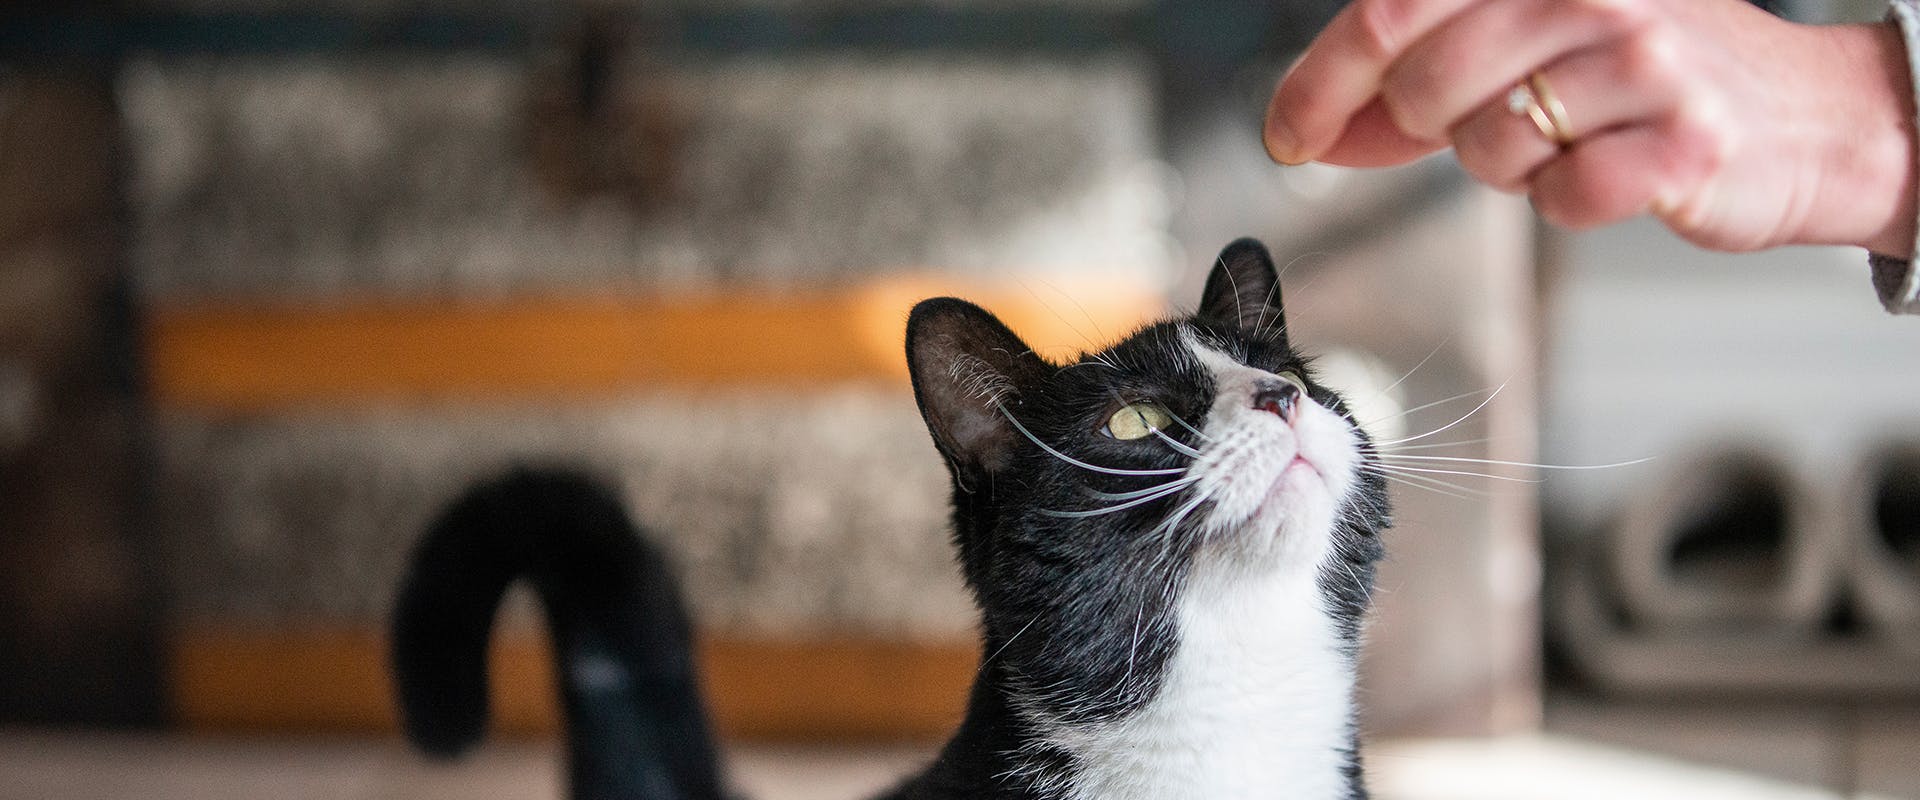 A cat looking up towards a person's hand holding a treat